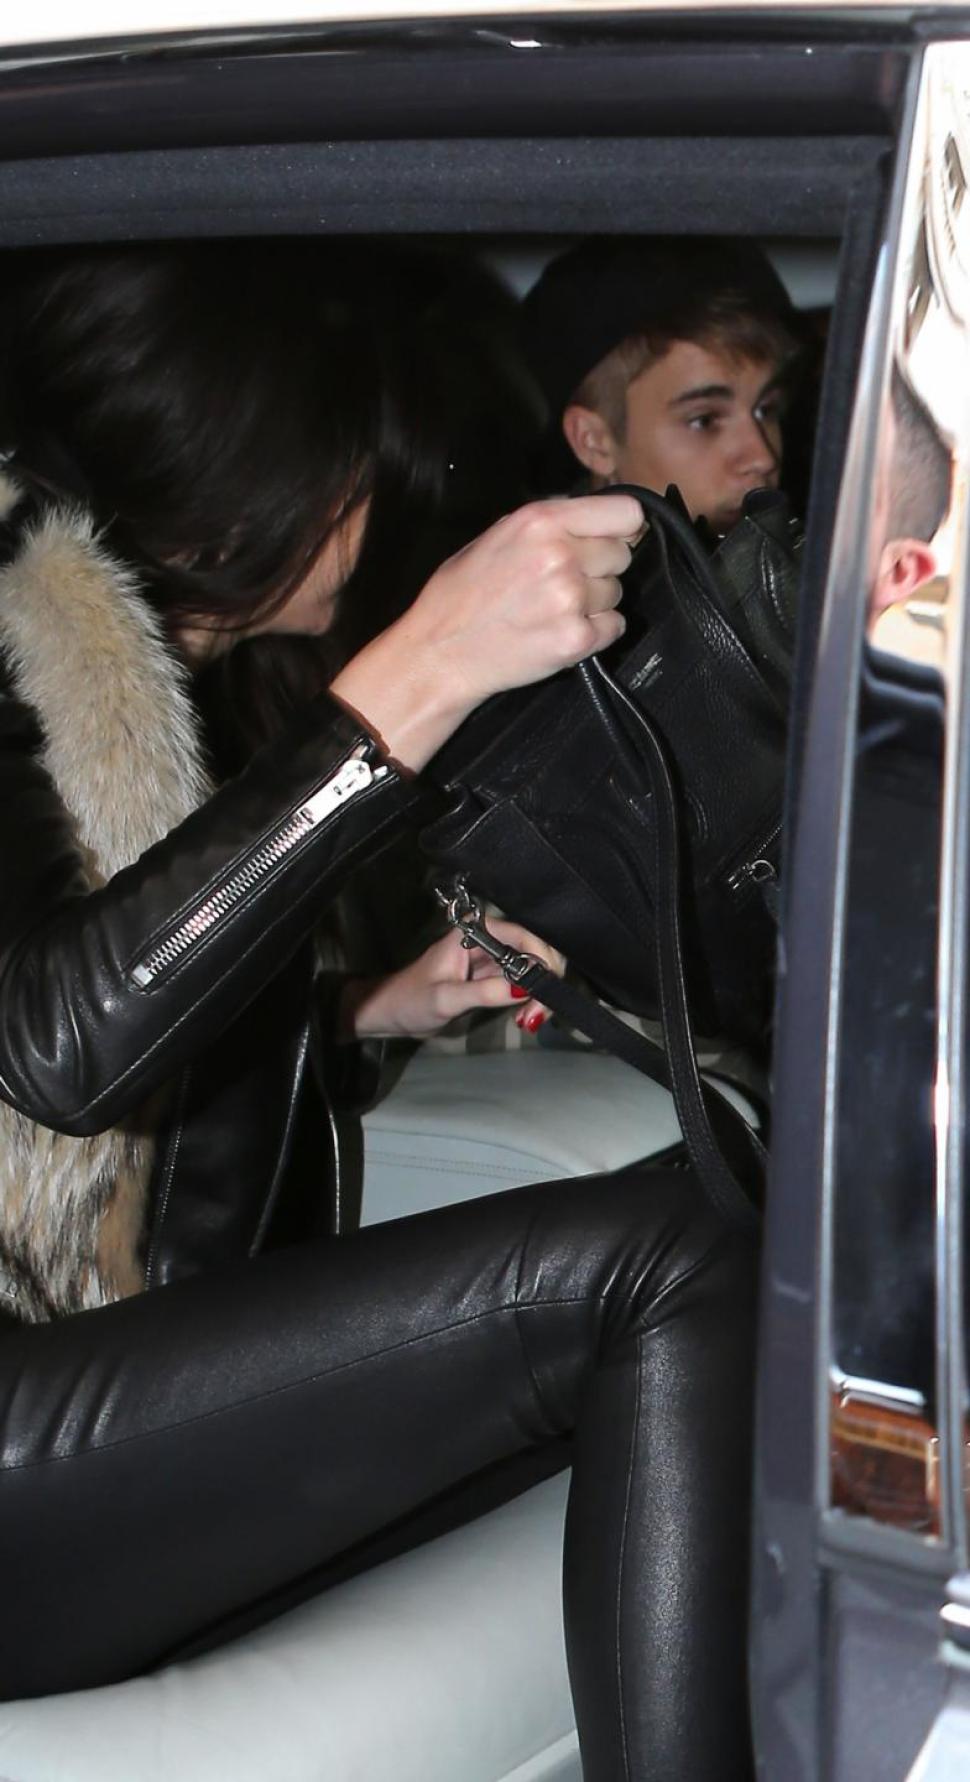 Justin Bieber and Kendall Jenner disembark for their high-profile dinner date in Paris.